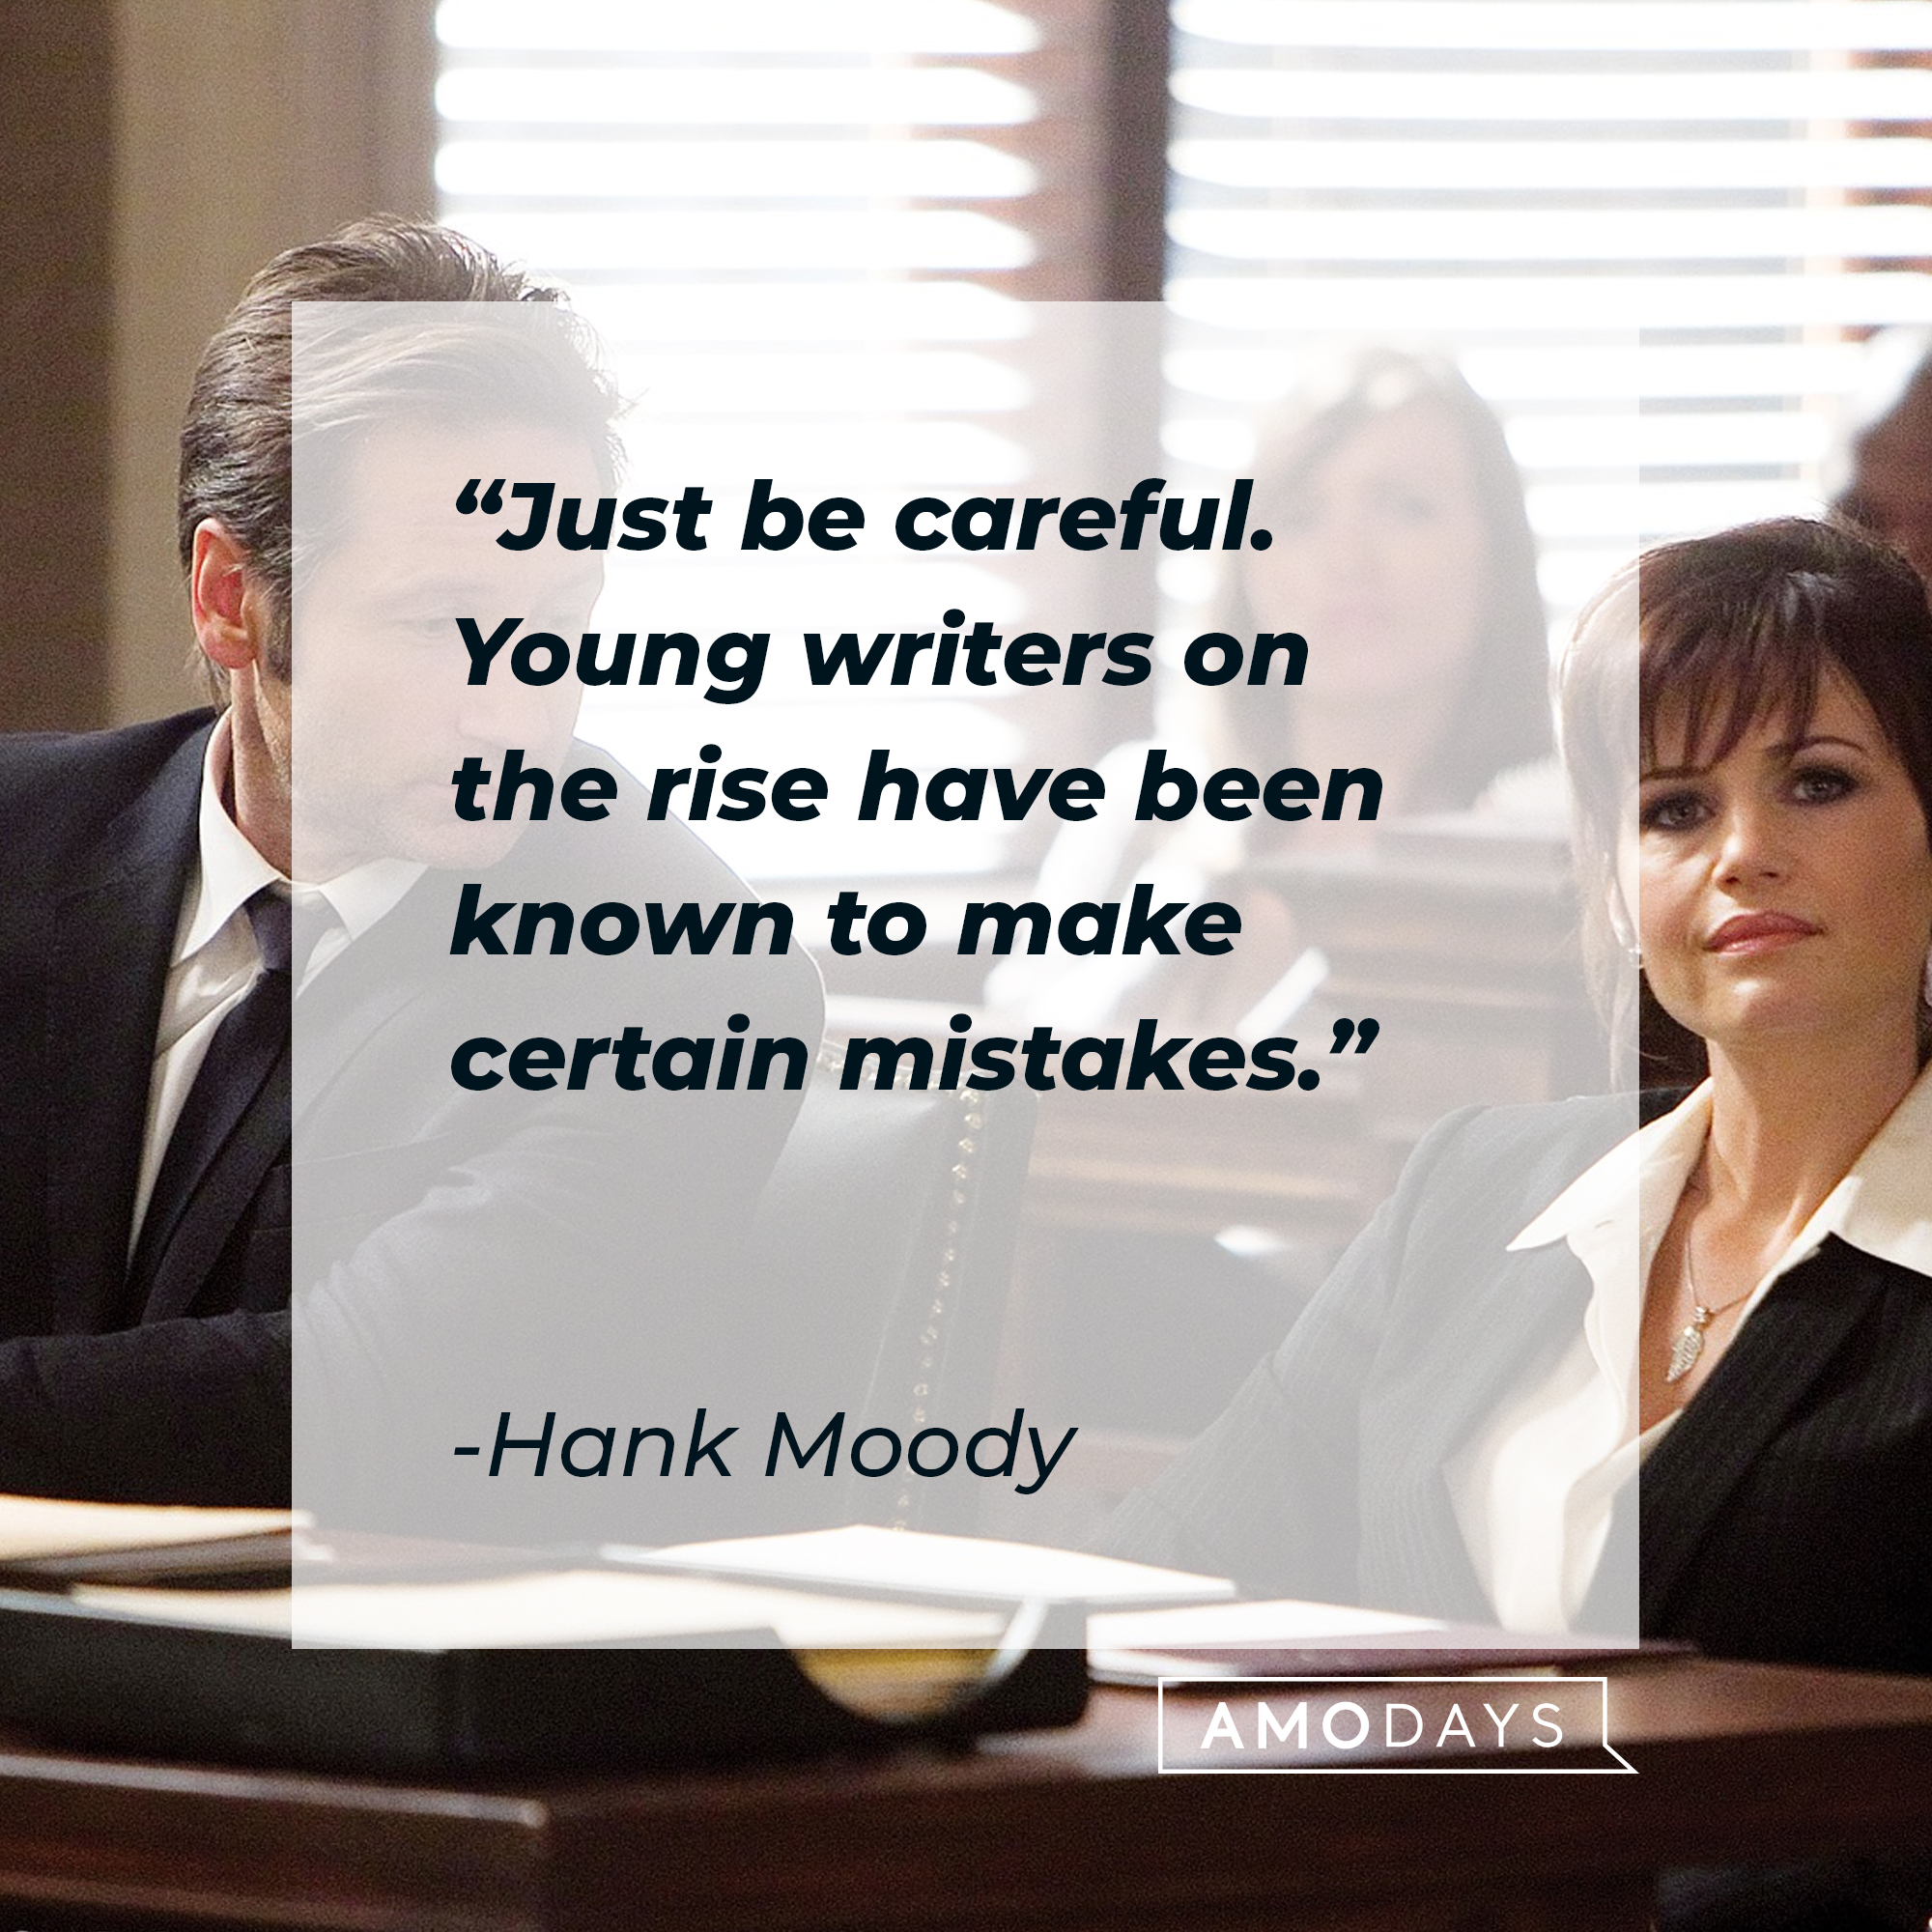 Hank Moody's quote: "Just be careful. Young writers on the rise have been known to make certain mistakes." | Image: AmoDays